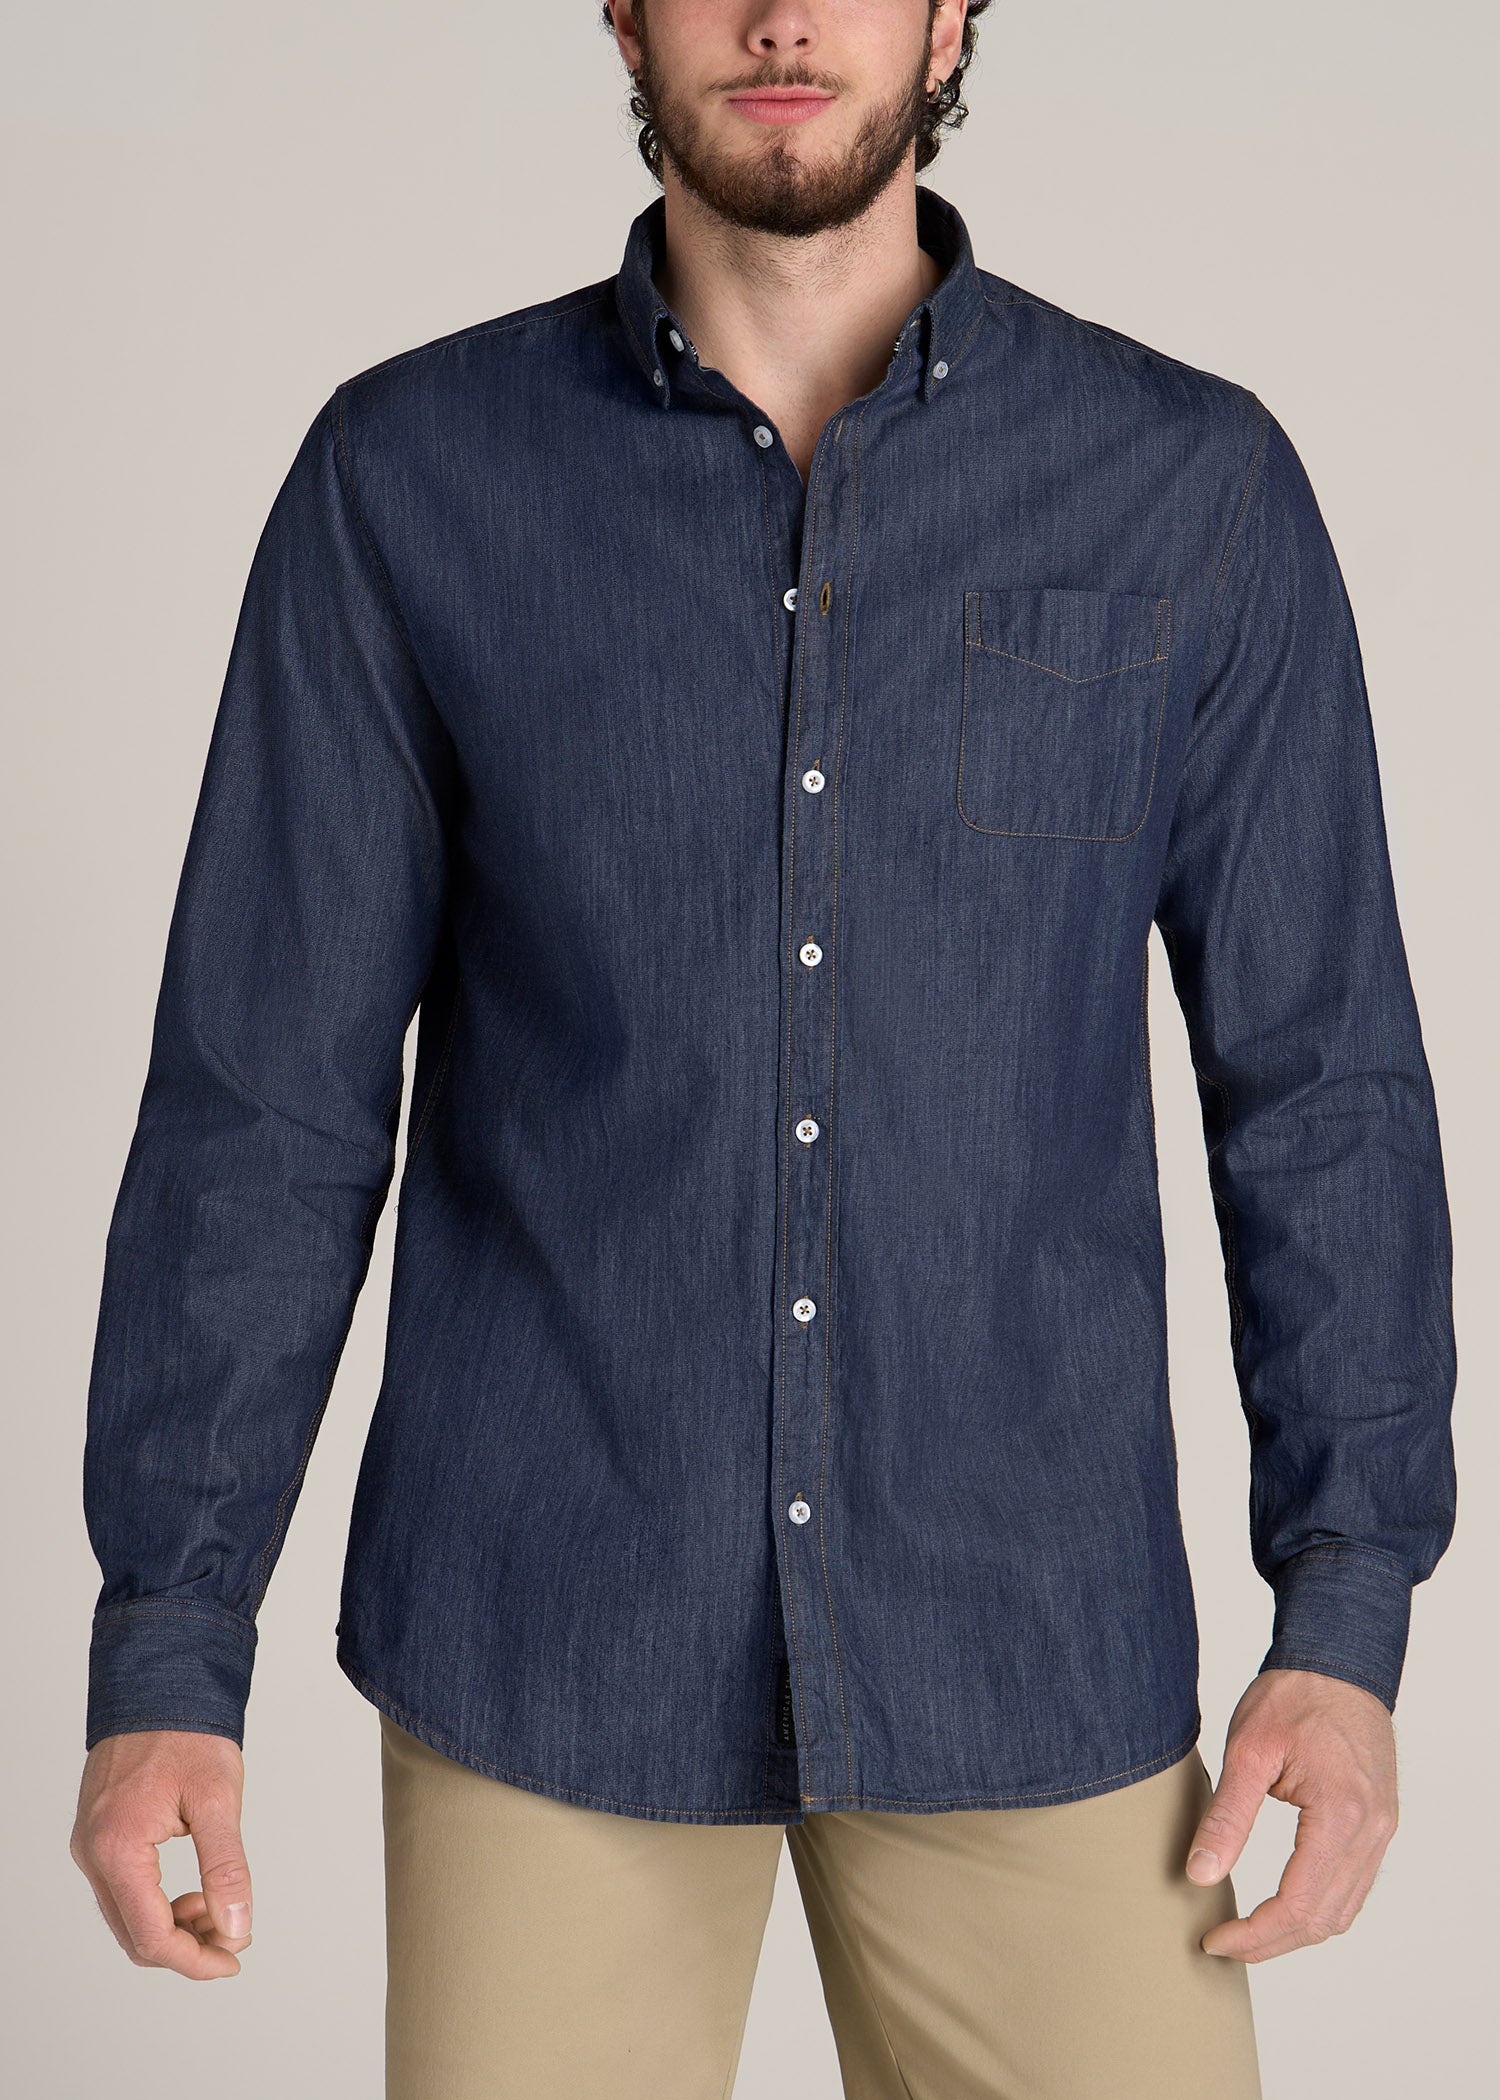 Chambray Button-Down Shirt for Tall Men in Dark Chambray